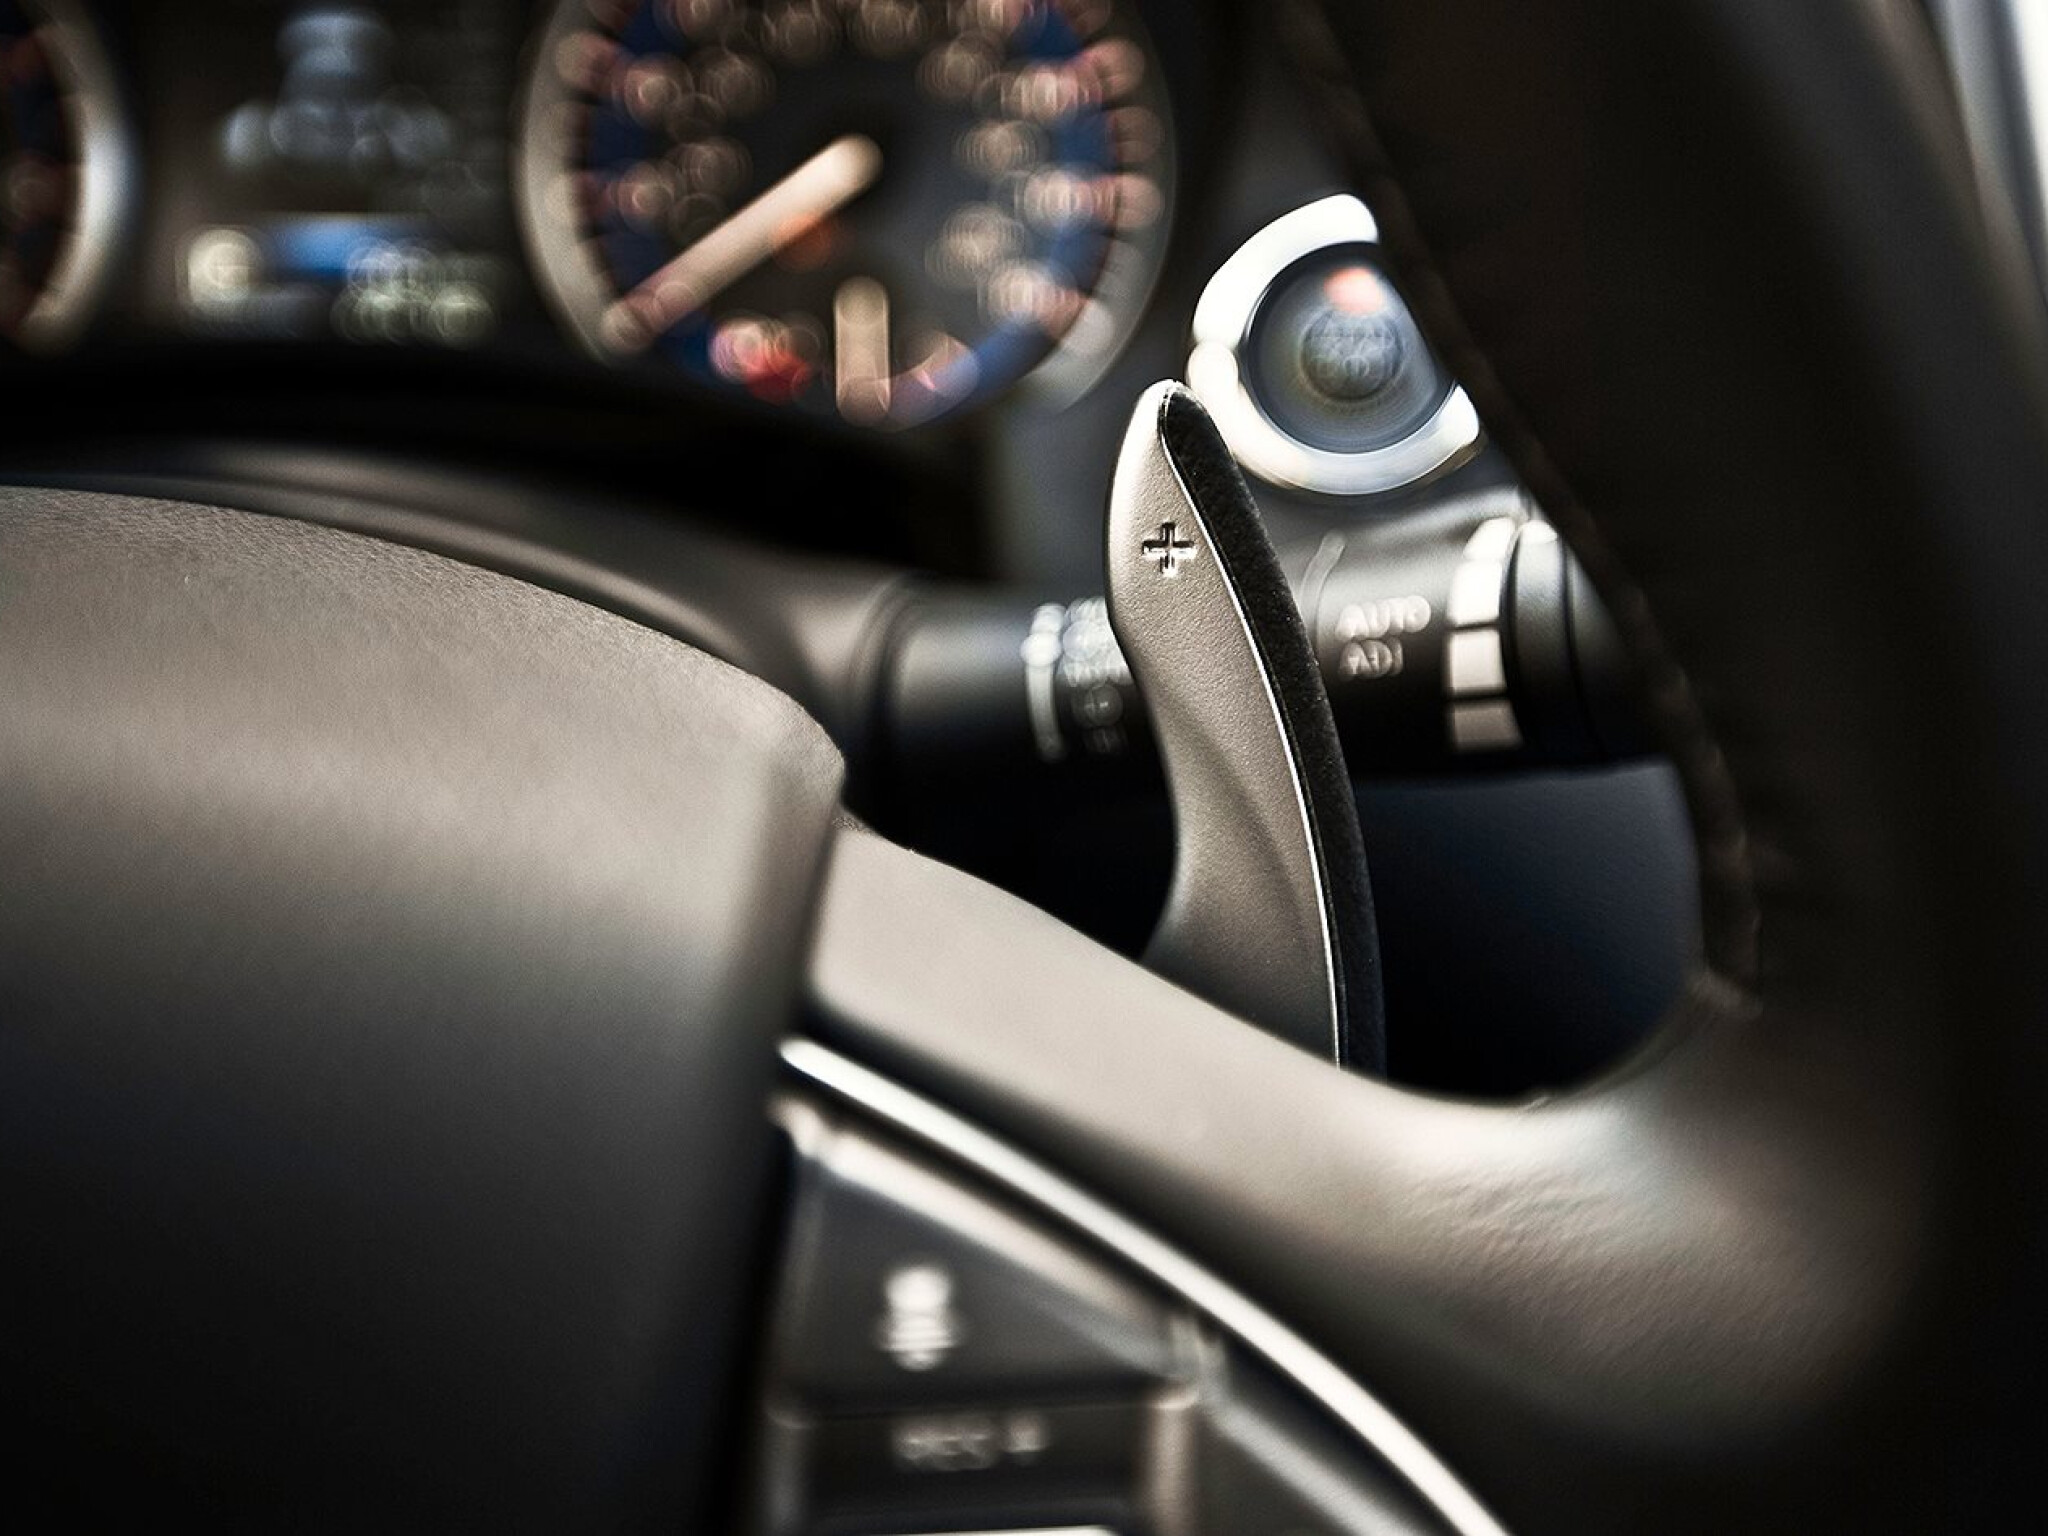 Let's talk about the correct way to do paddle shifters - CNET